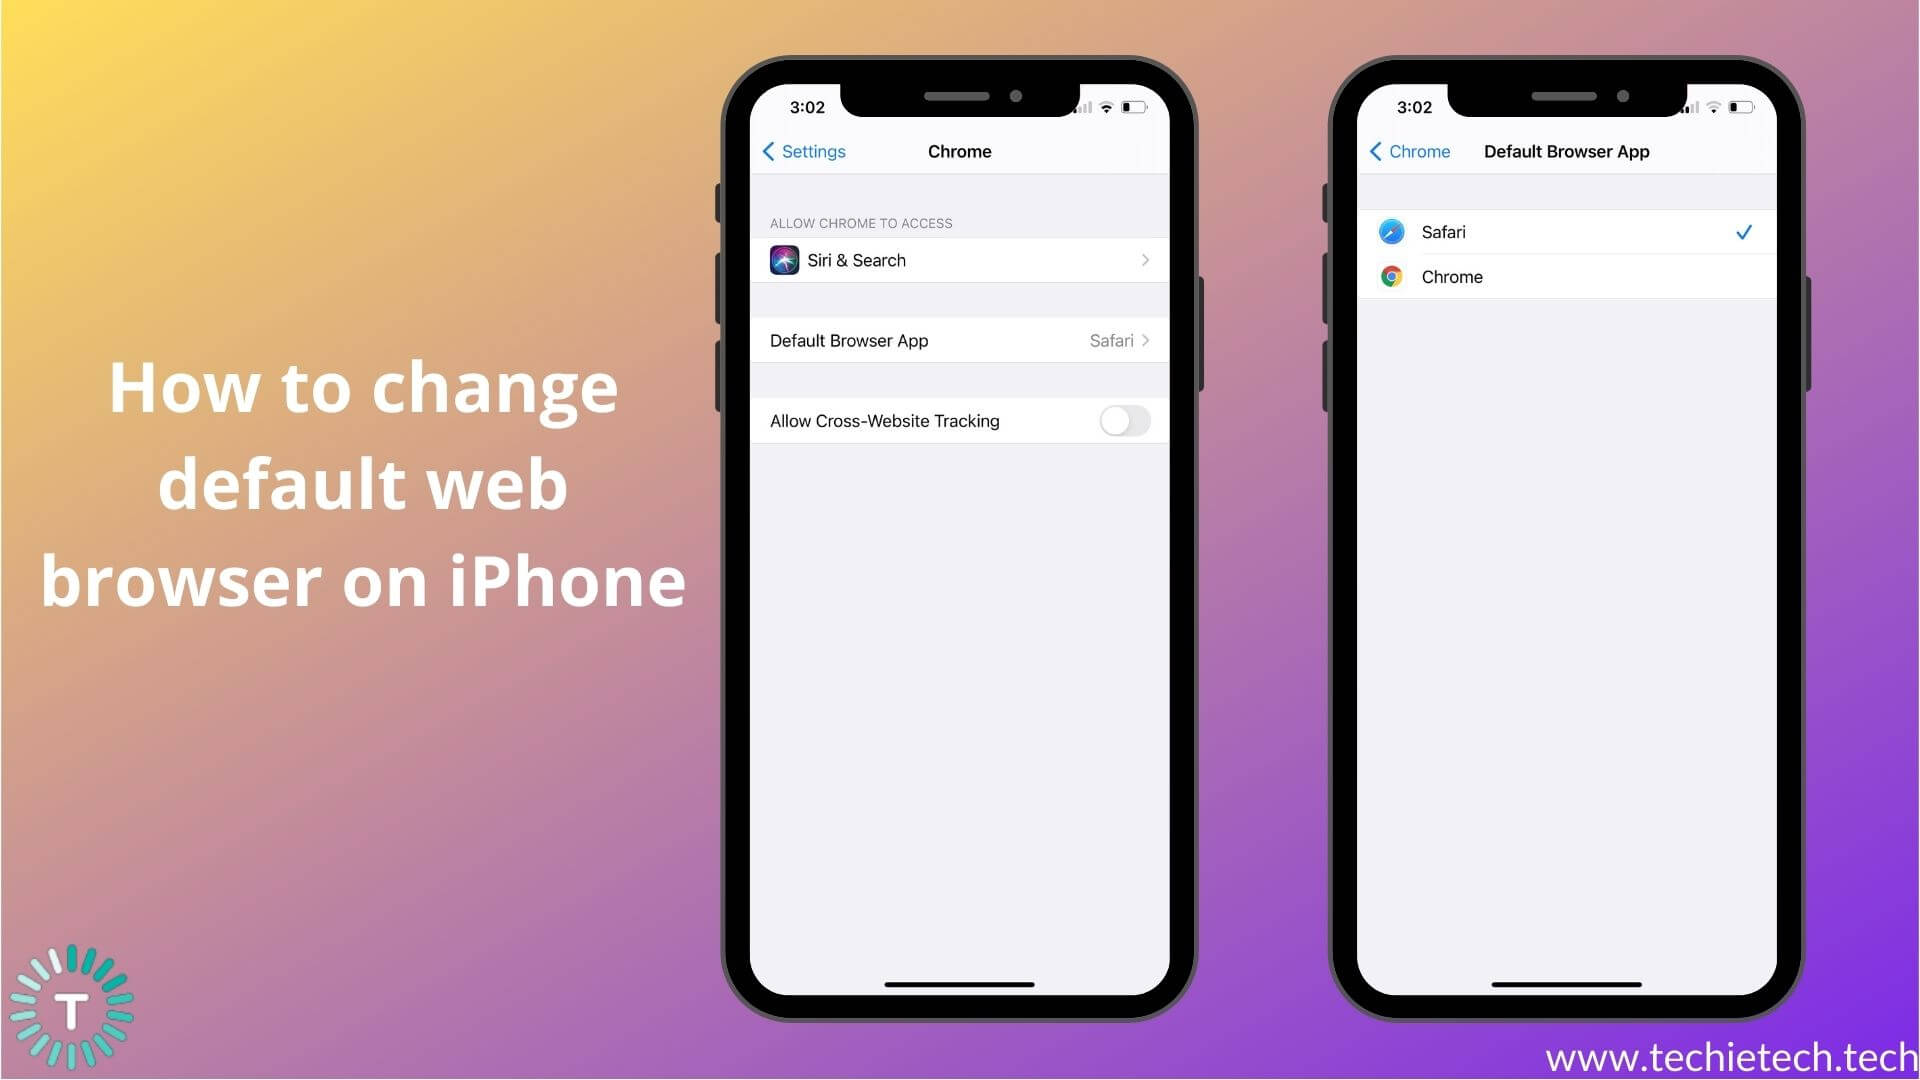 How to change the default Web Browser on iPhone